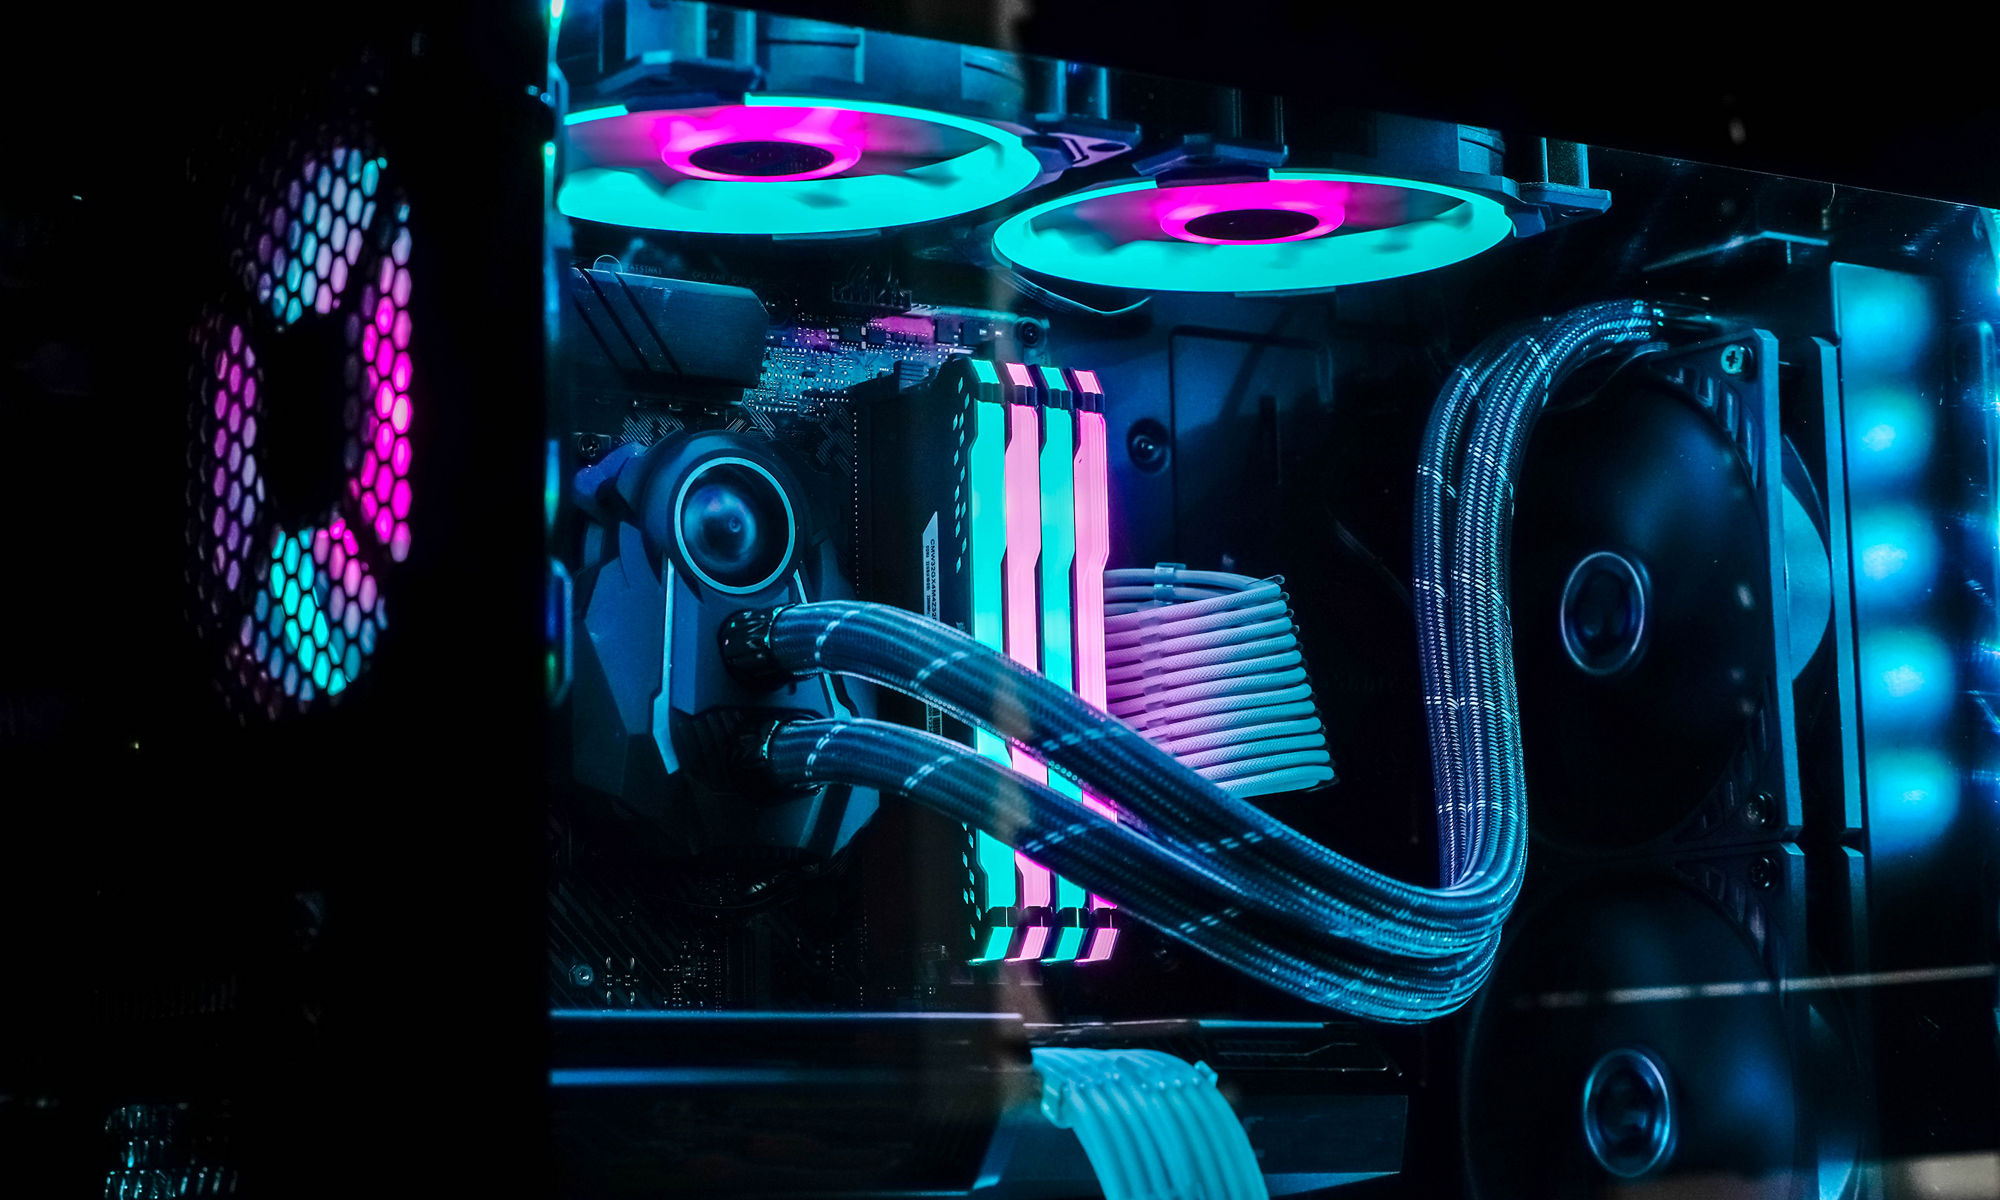 Gaming workstation in bright pink and blue hues